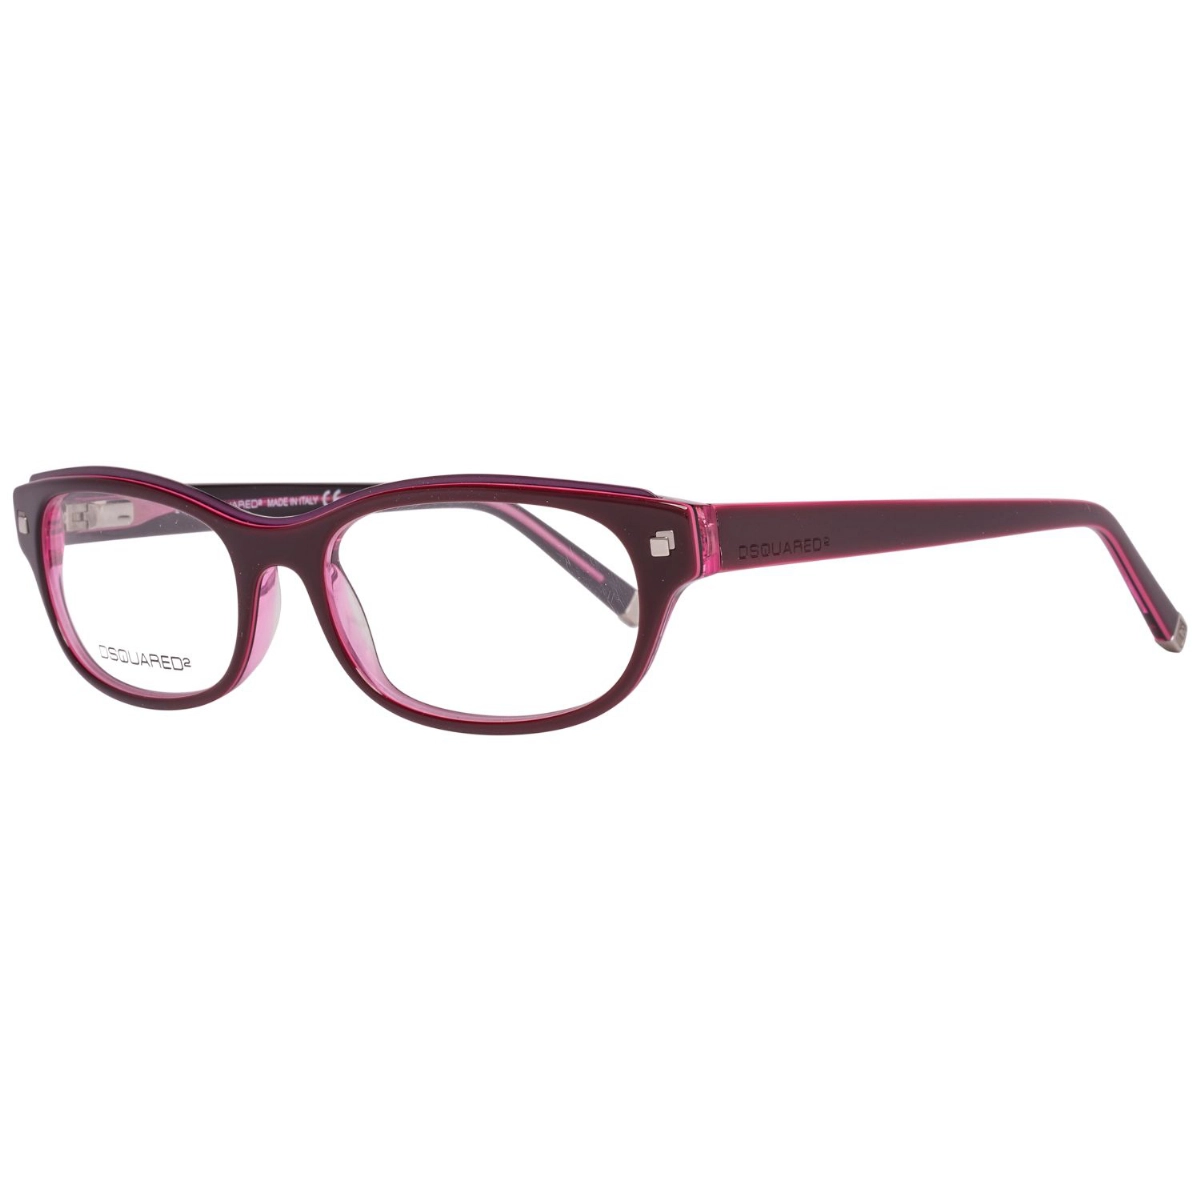 GLASSES FOR WOMAN DSQUARED2 DQ5022-083-51